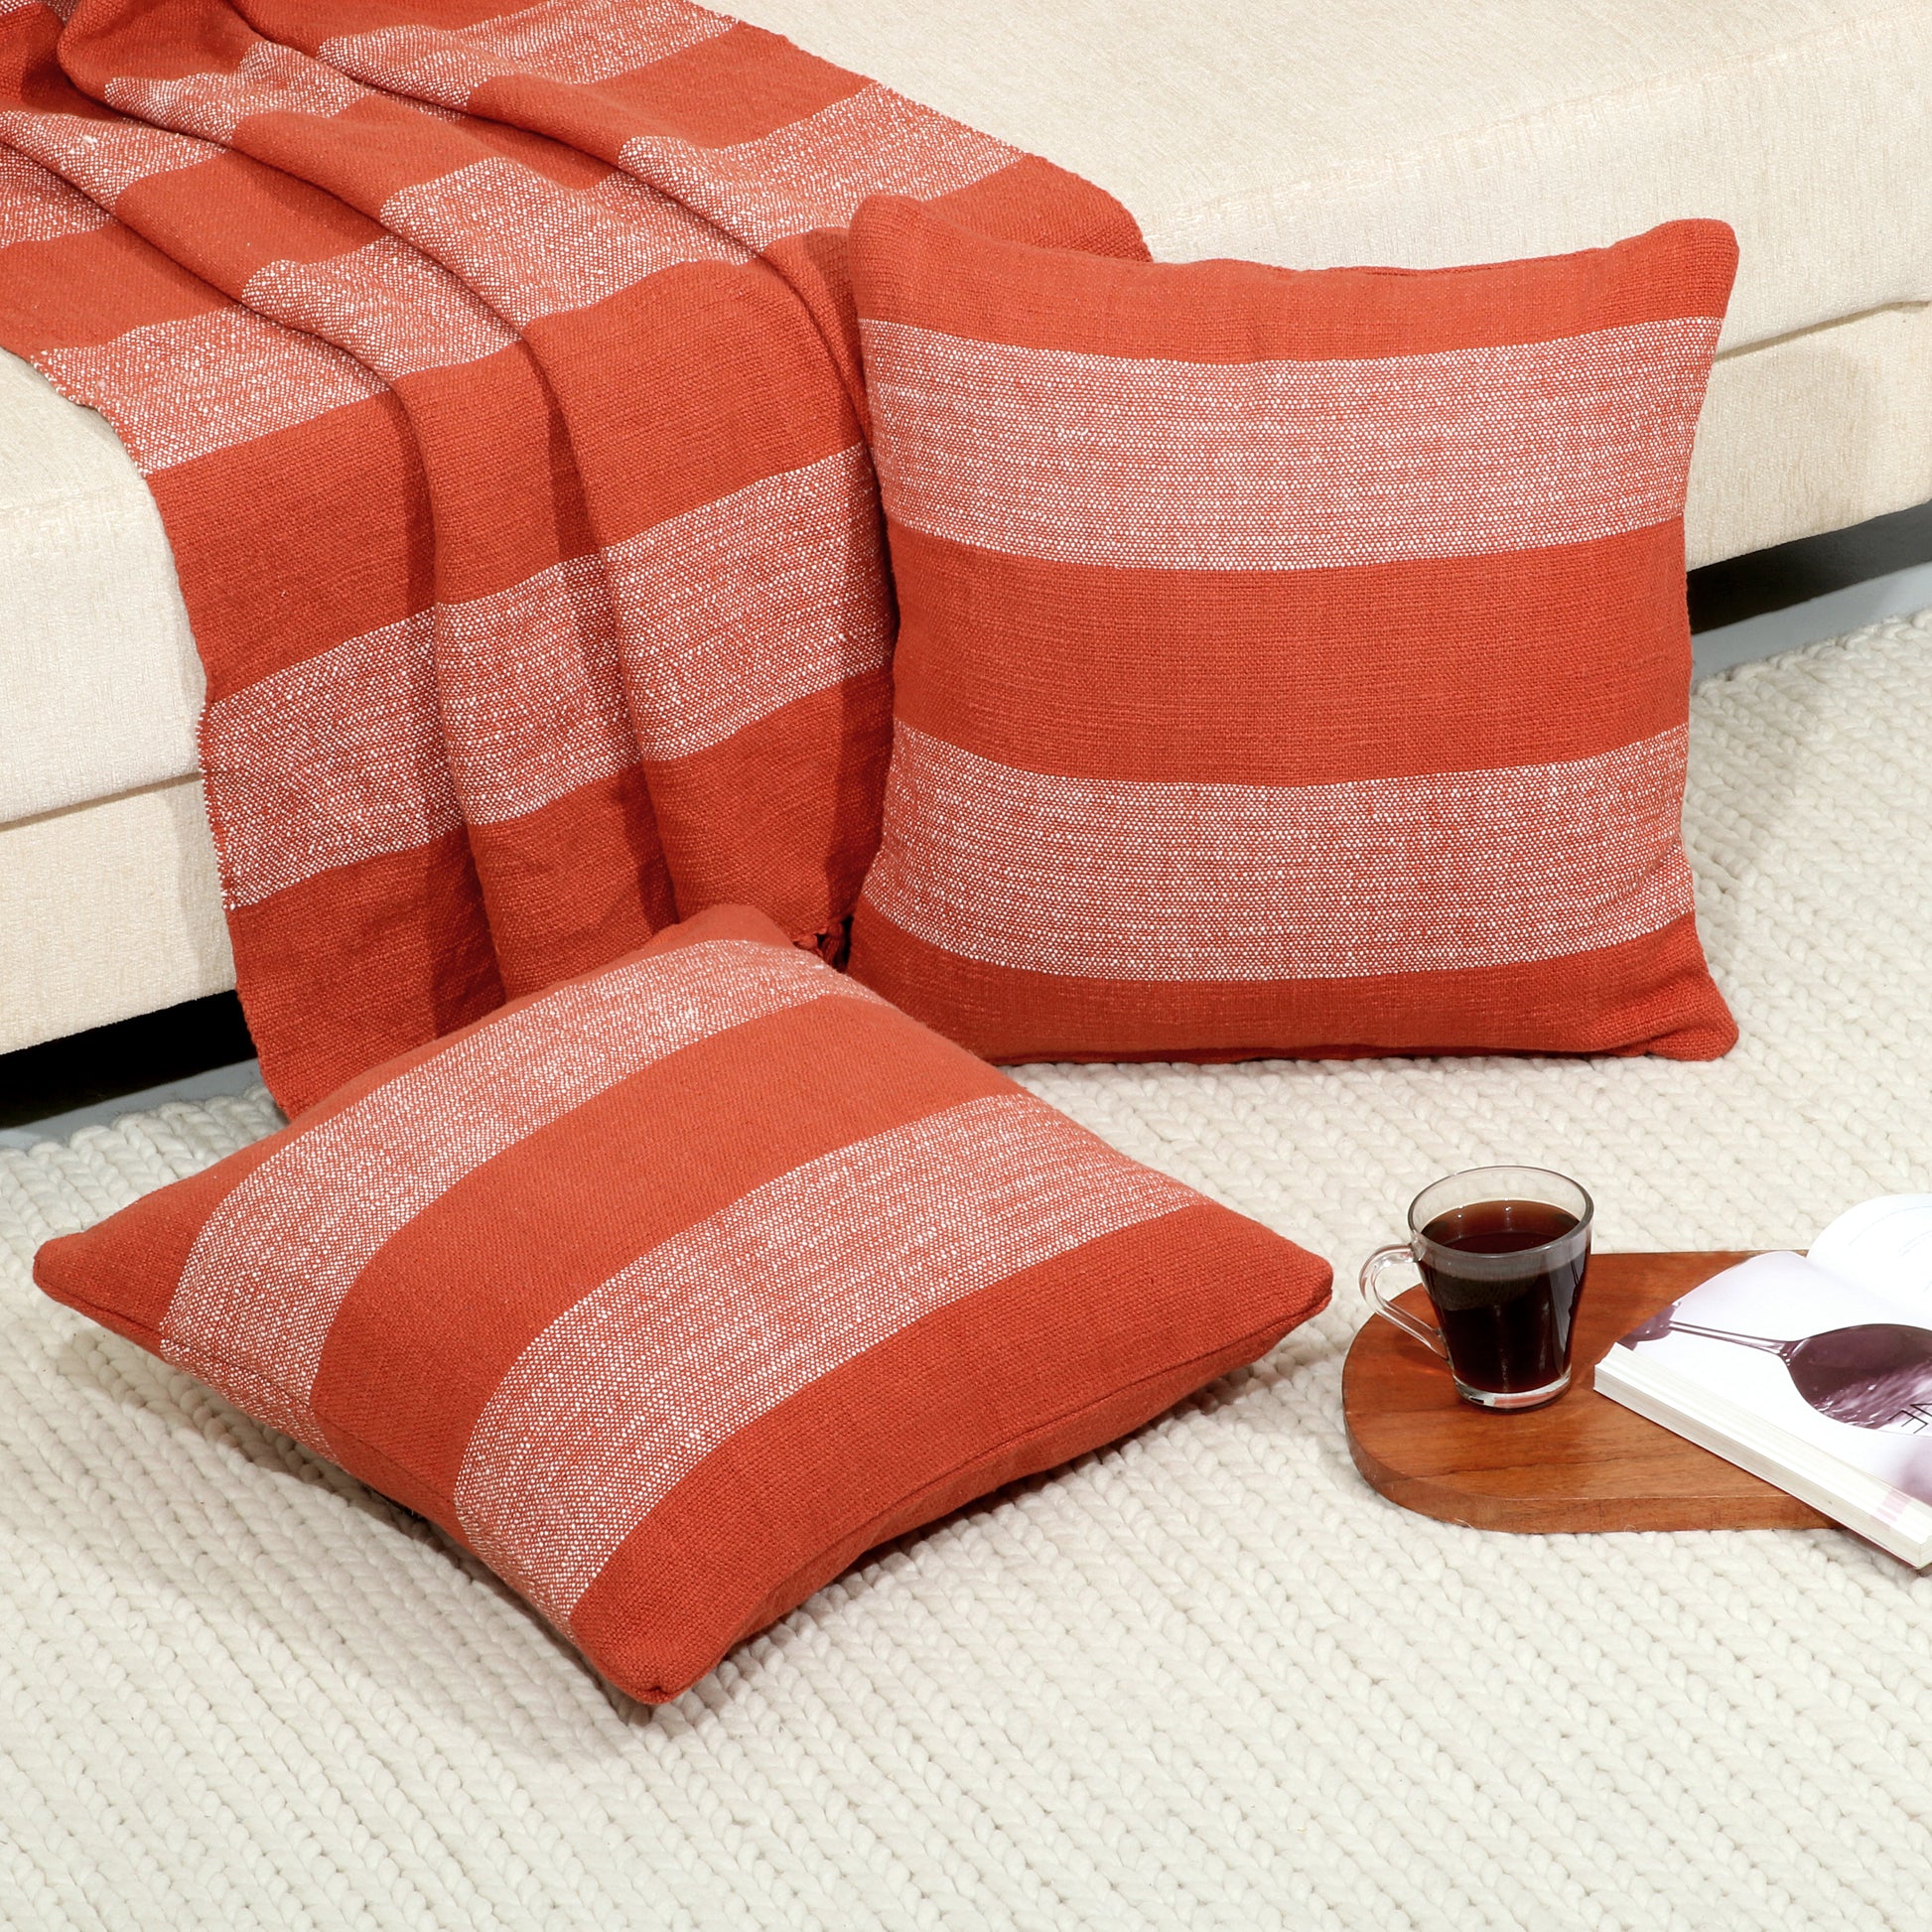 Combo Deal - Stripe design - Cotton throw blanket and pillow cases - TreeWool Bundle Deal#color_rust